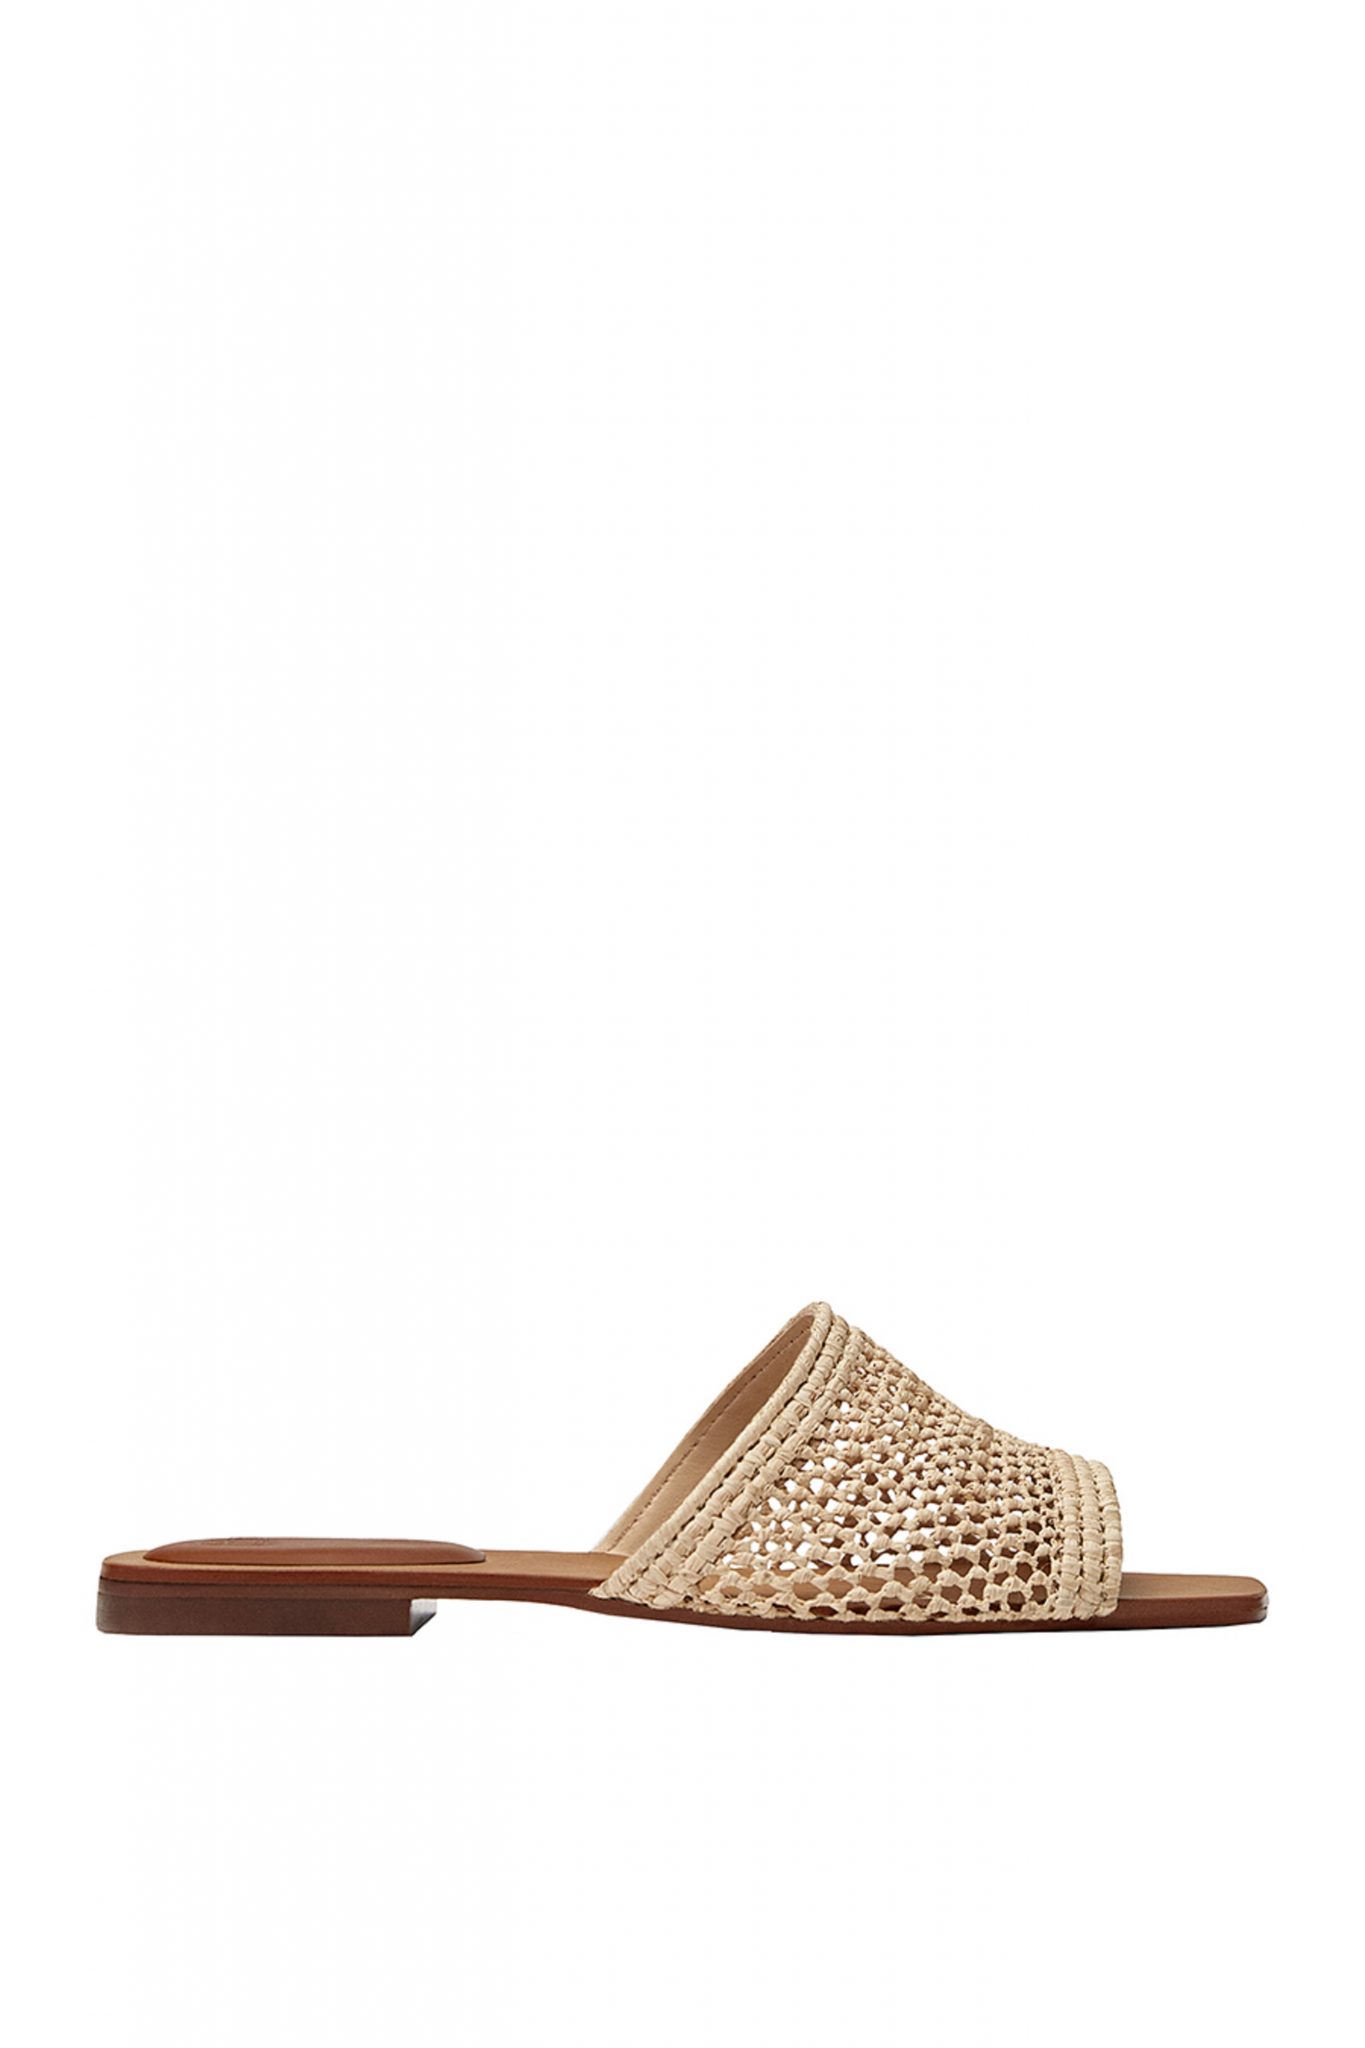 Woven shoes and sandals trend